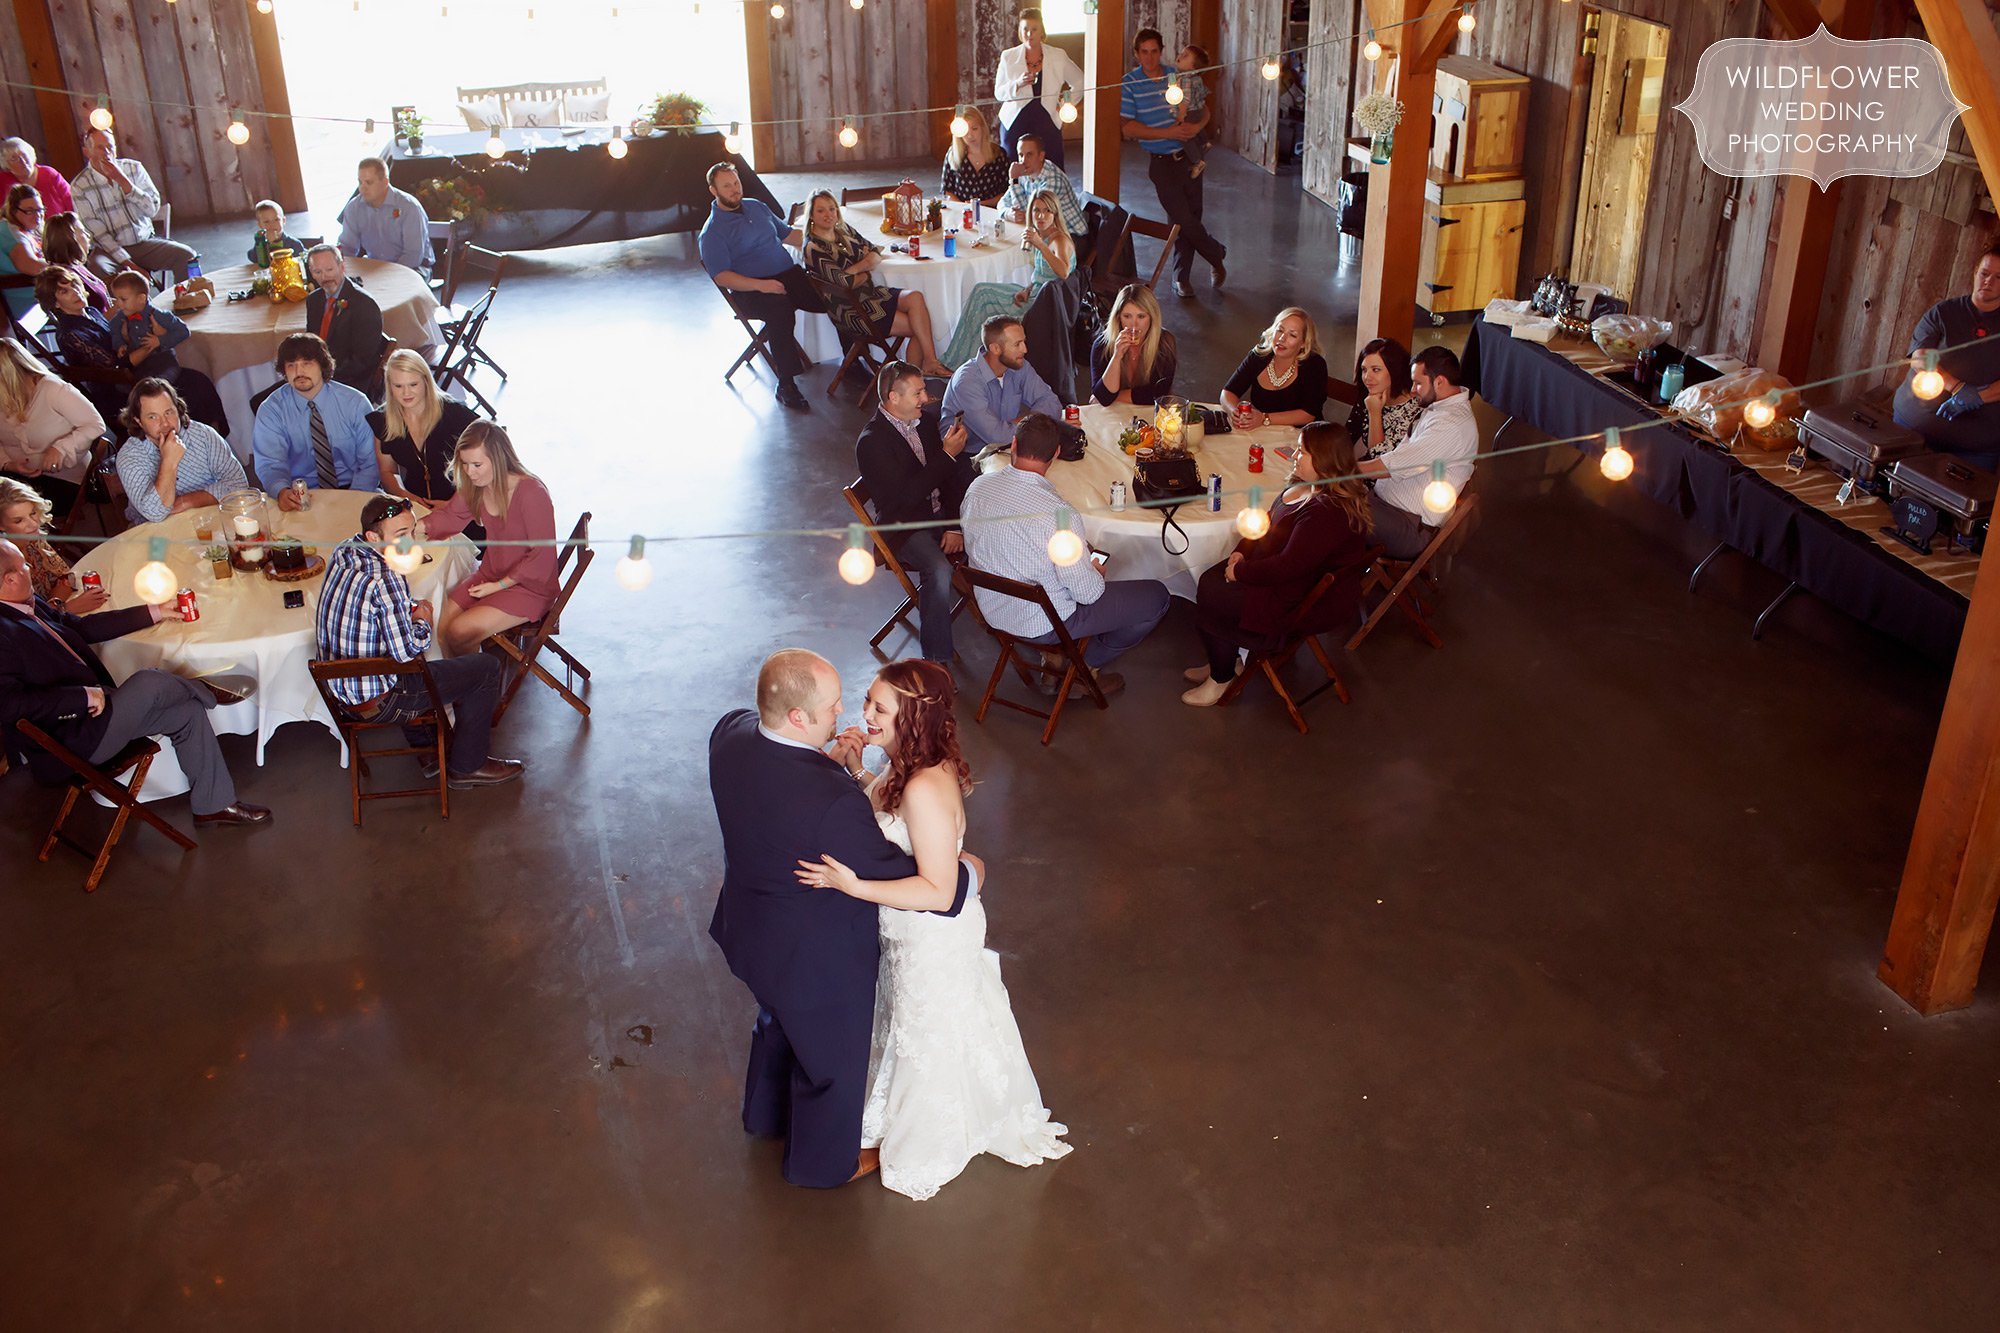 First dance with cafe lights at this barn wedding in KS.